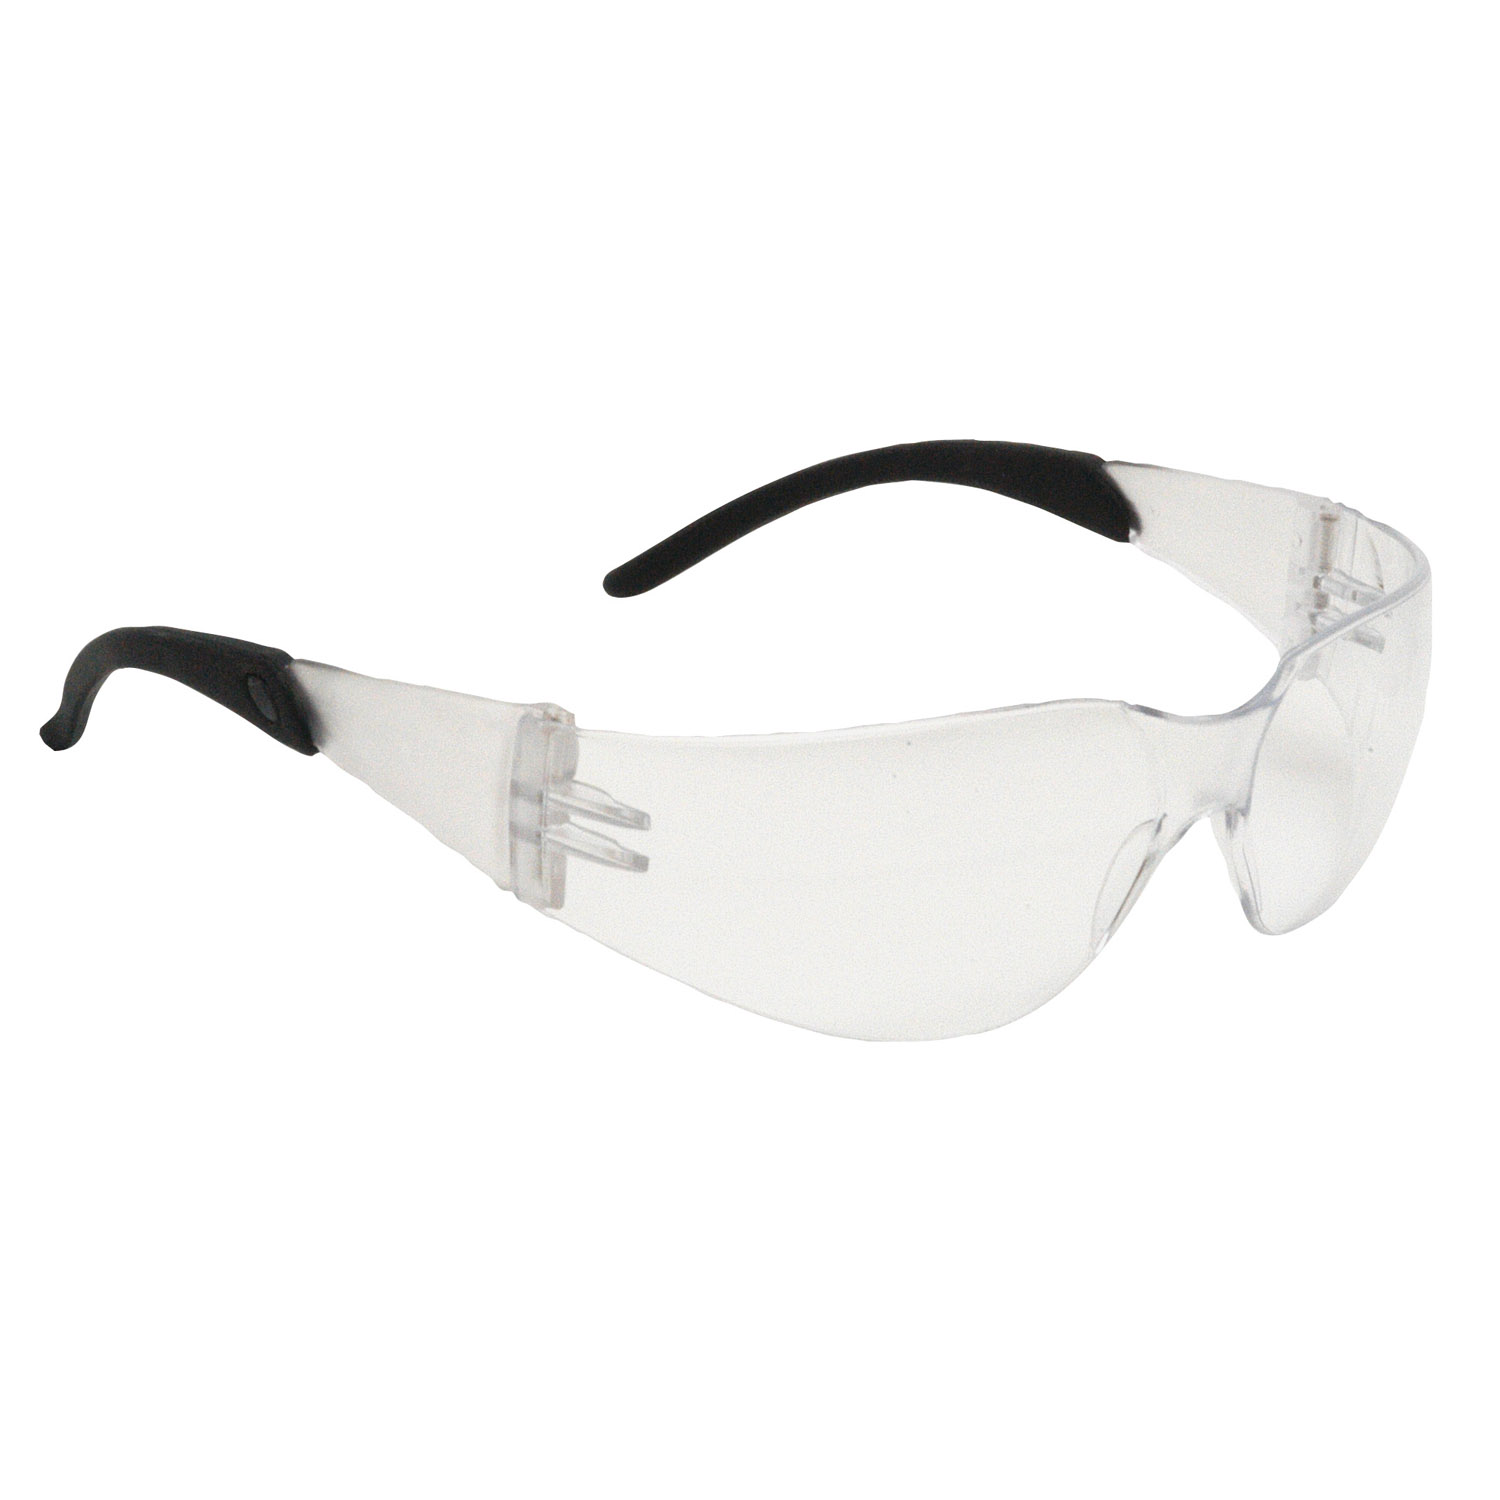 SAFETY GLASSES 12 PAIR RADIANS MIRAGE SMALL FRAME CLEAR ANSI MRS110ID 